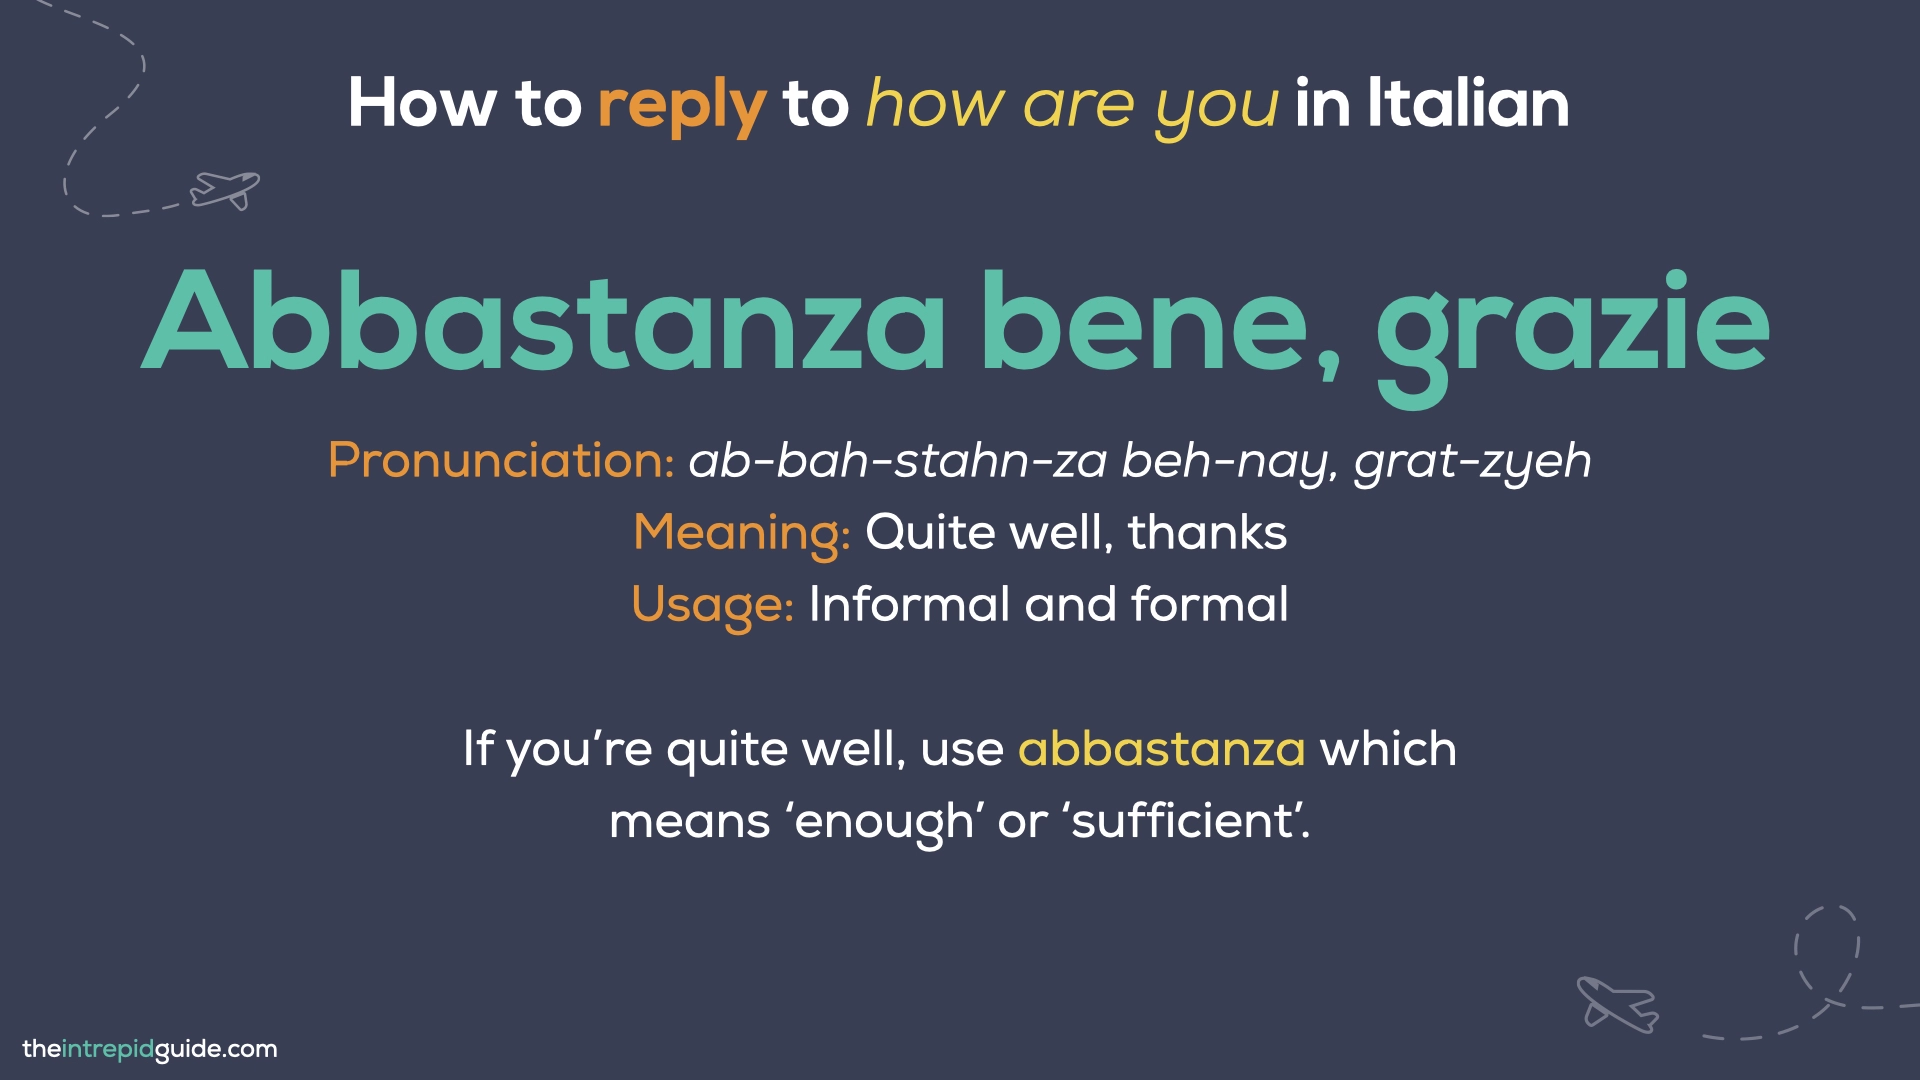 How to say How are you in Italian - Abbastanza bene